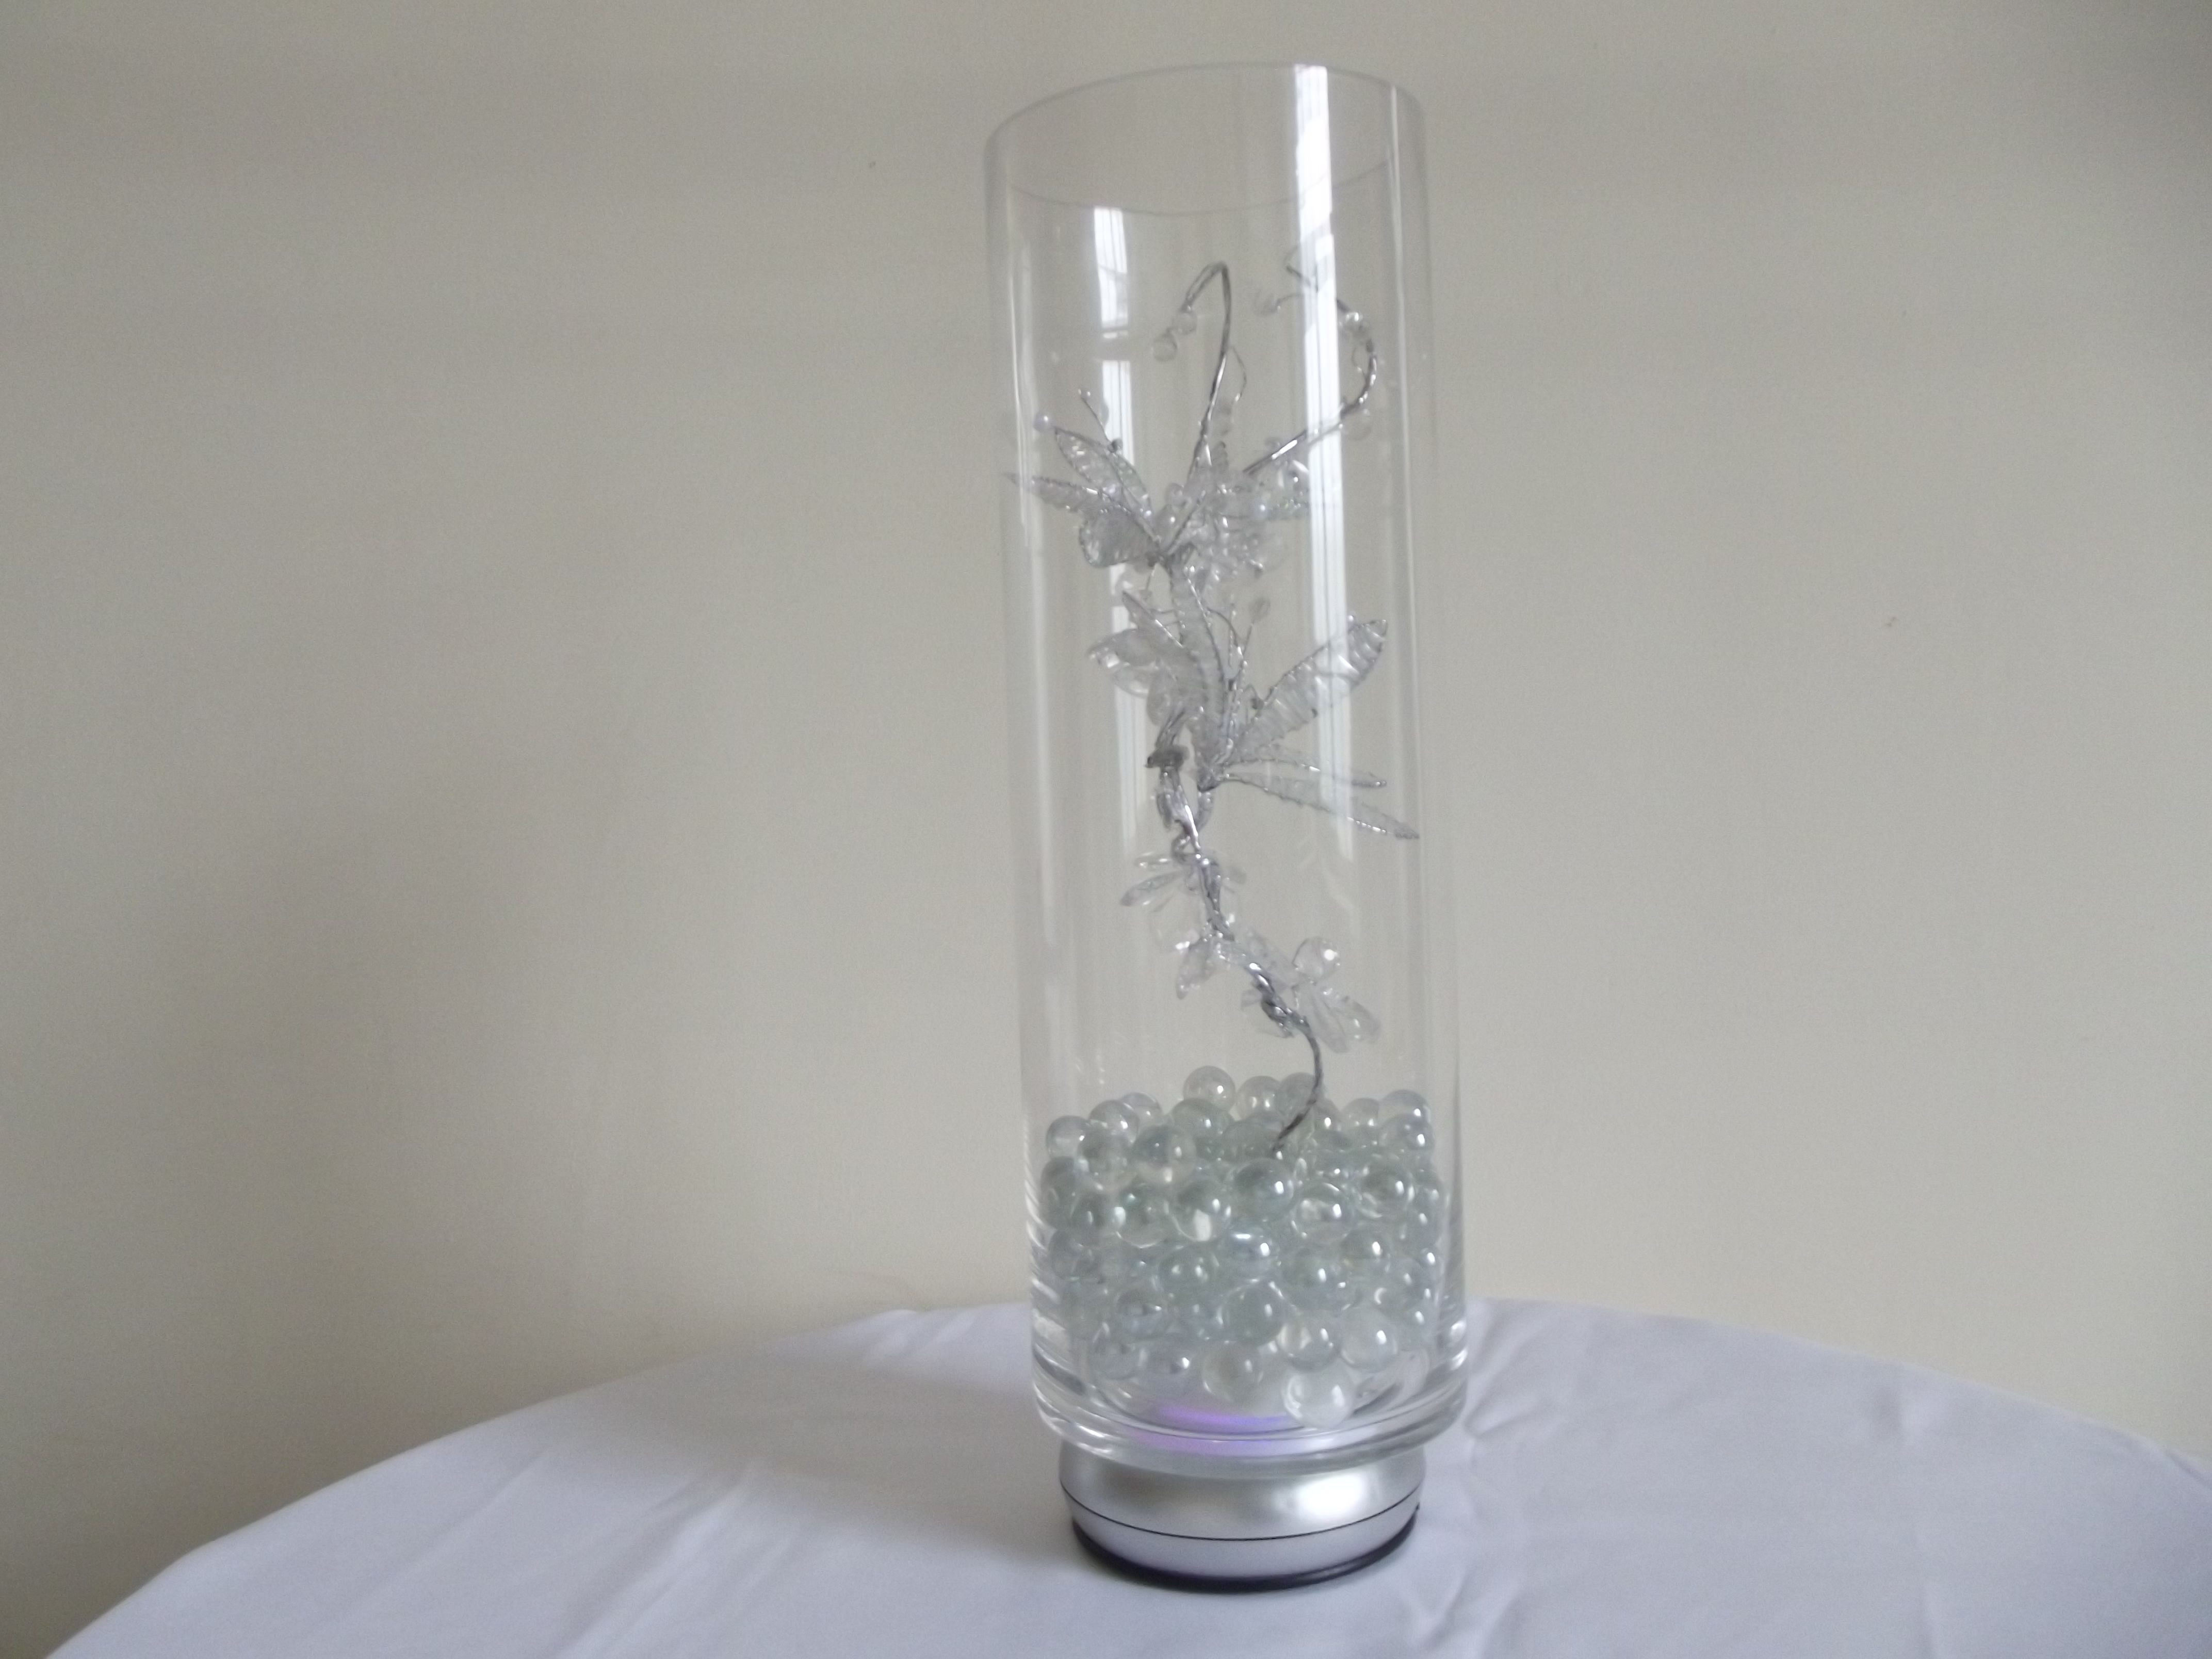 led base lights for vases of a 40cm tall vase with built in led base lights which is decorated intended for a 40cm tall vase with built in led base lights which is decorated with silver crystal and floral decoration sitting on a bed of clear crystals